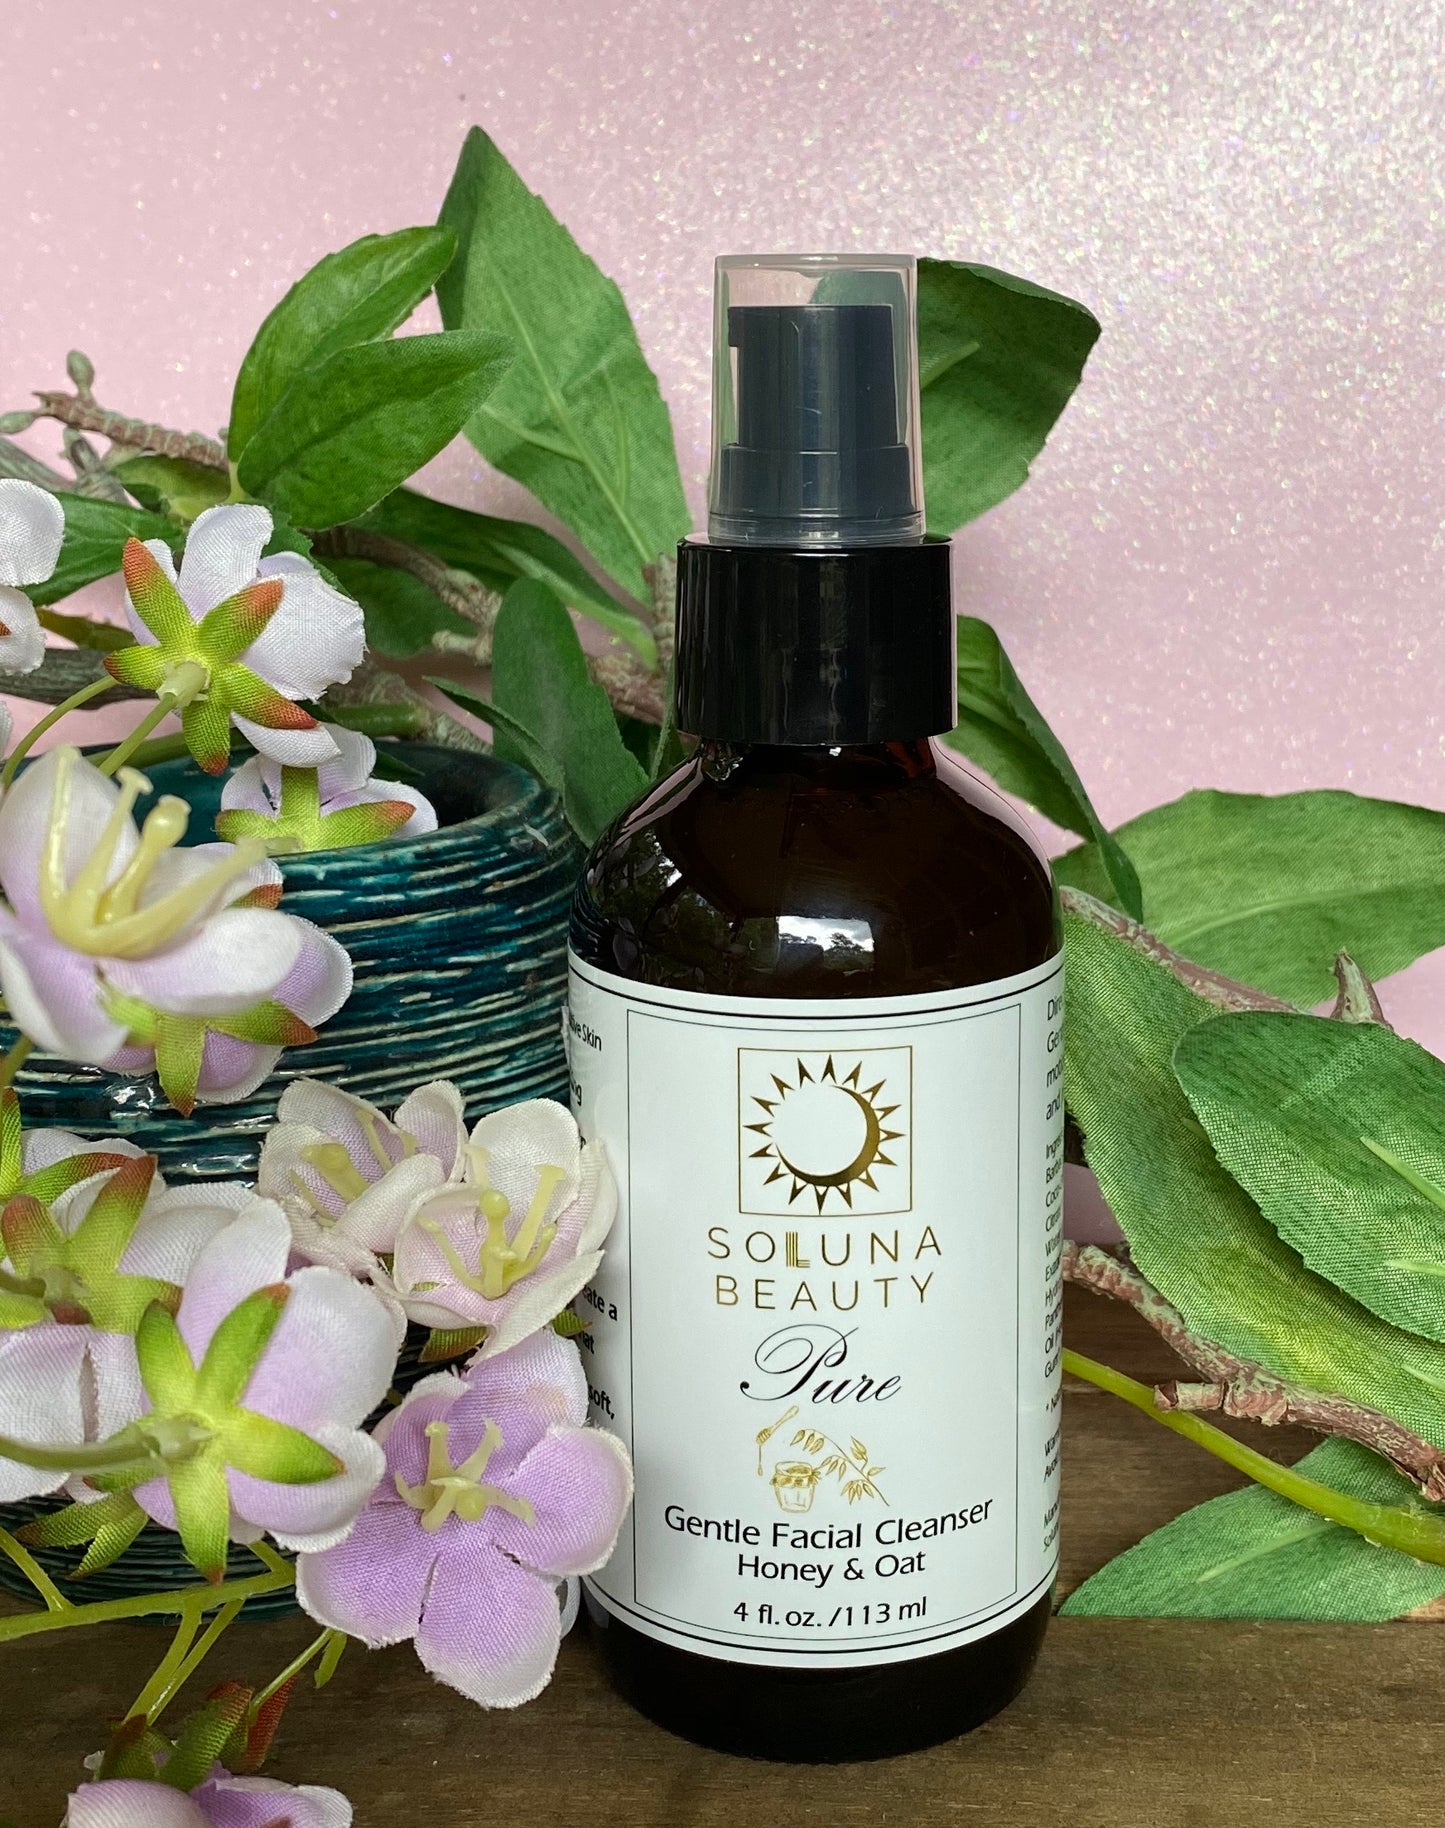 NEW Pure: Gentle Facial Cleanser